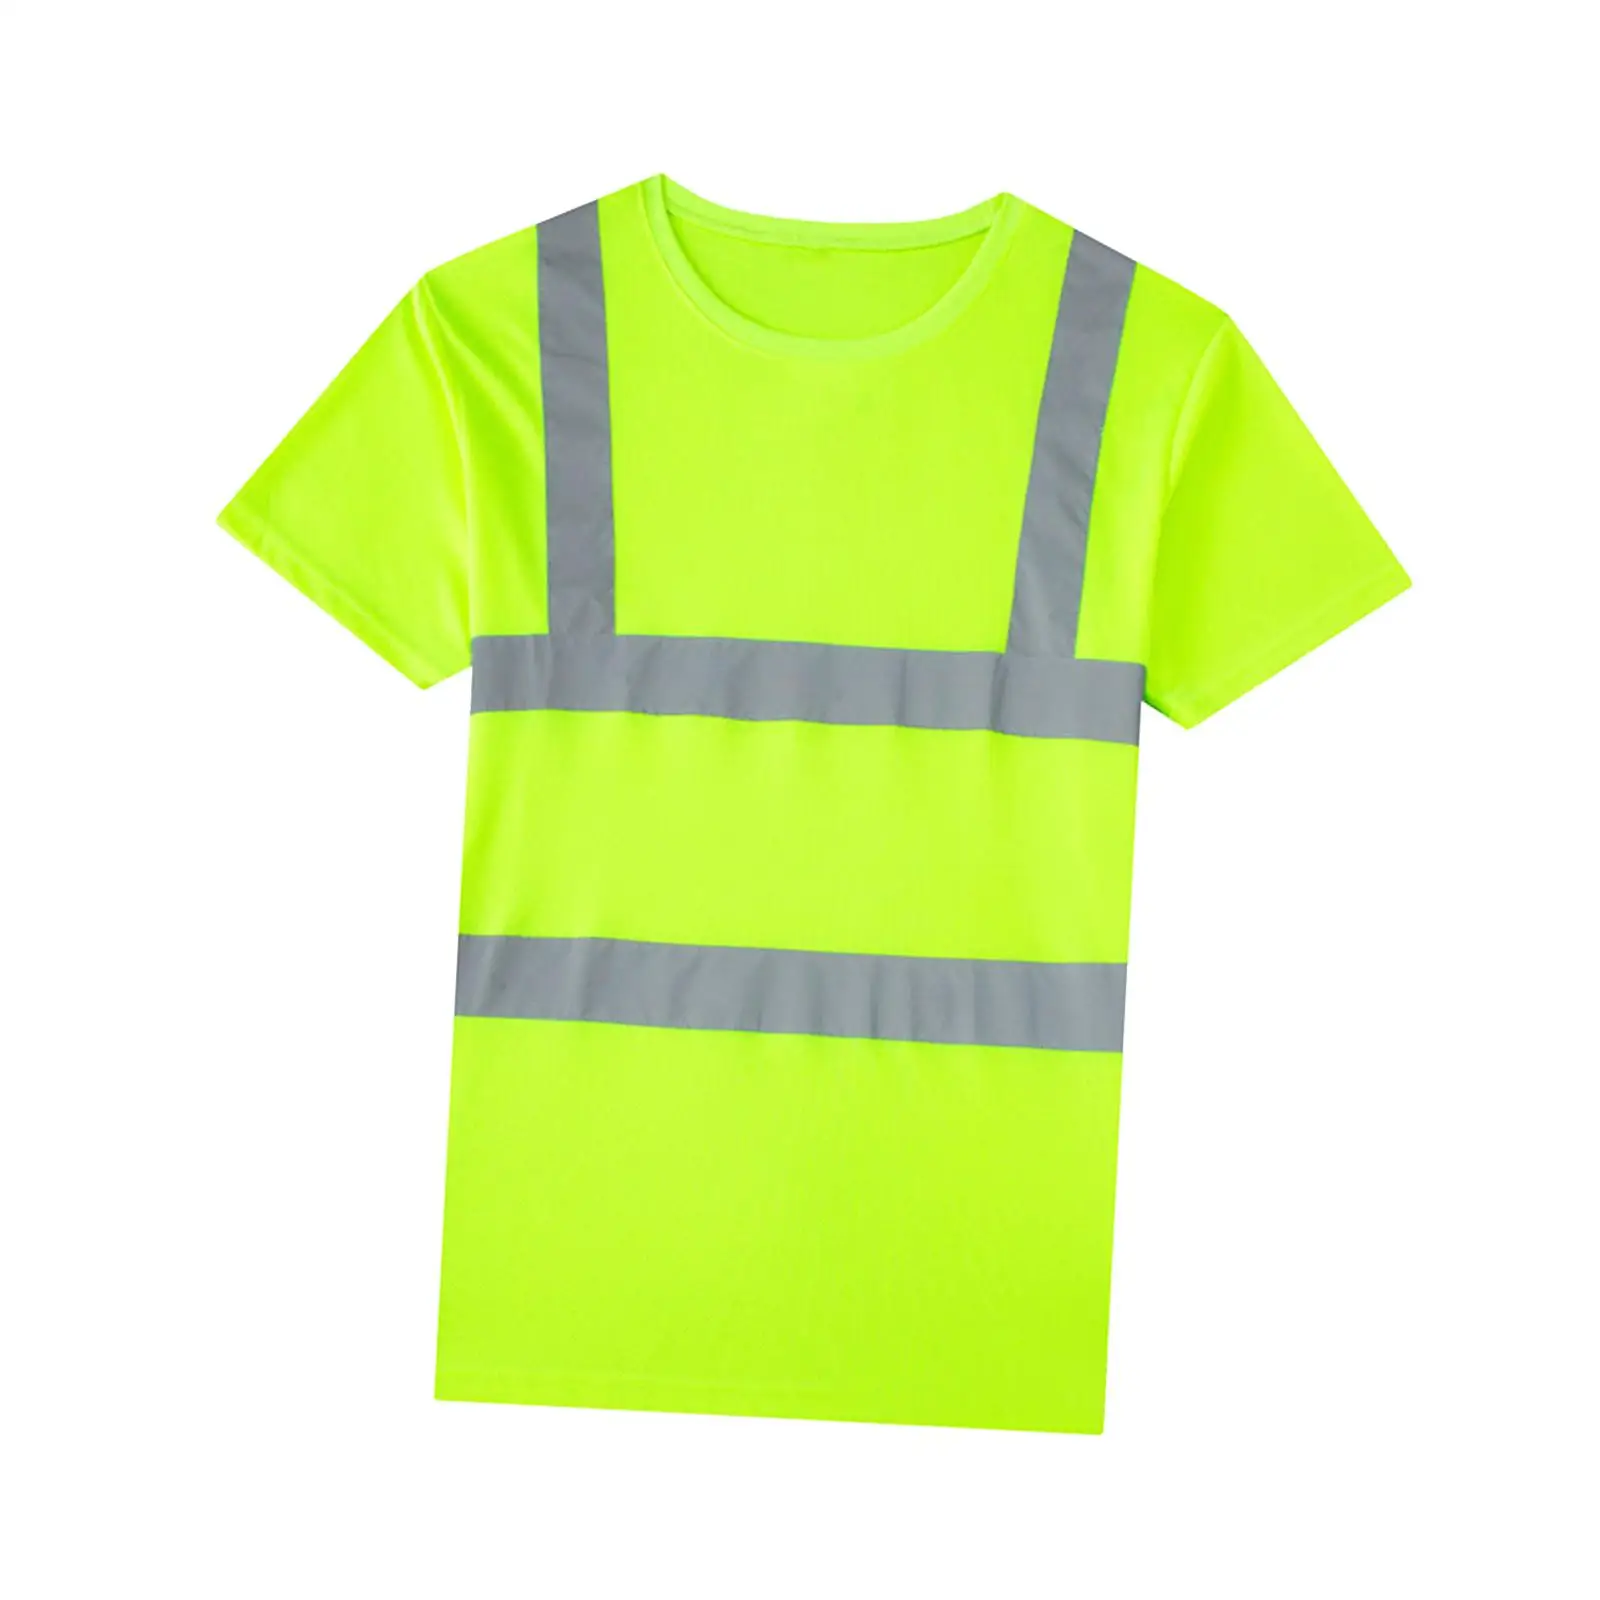 High Visibility Reflective Shirts 360° Reflective Coverage Safety T Shirts for Construction Firefighter Outdoor Cycling Railroad